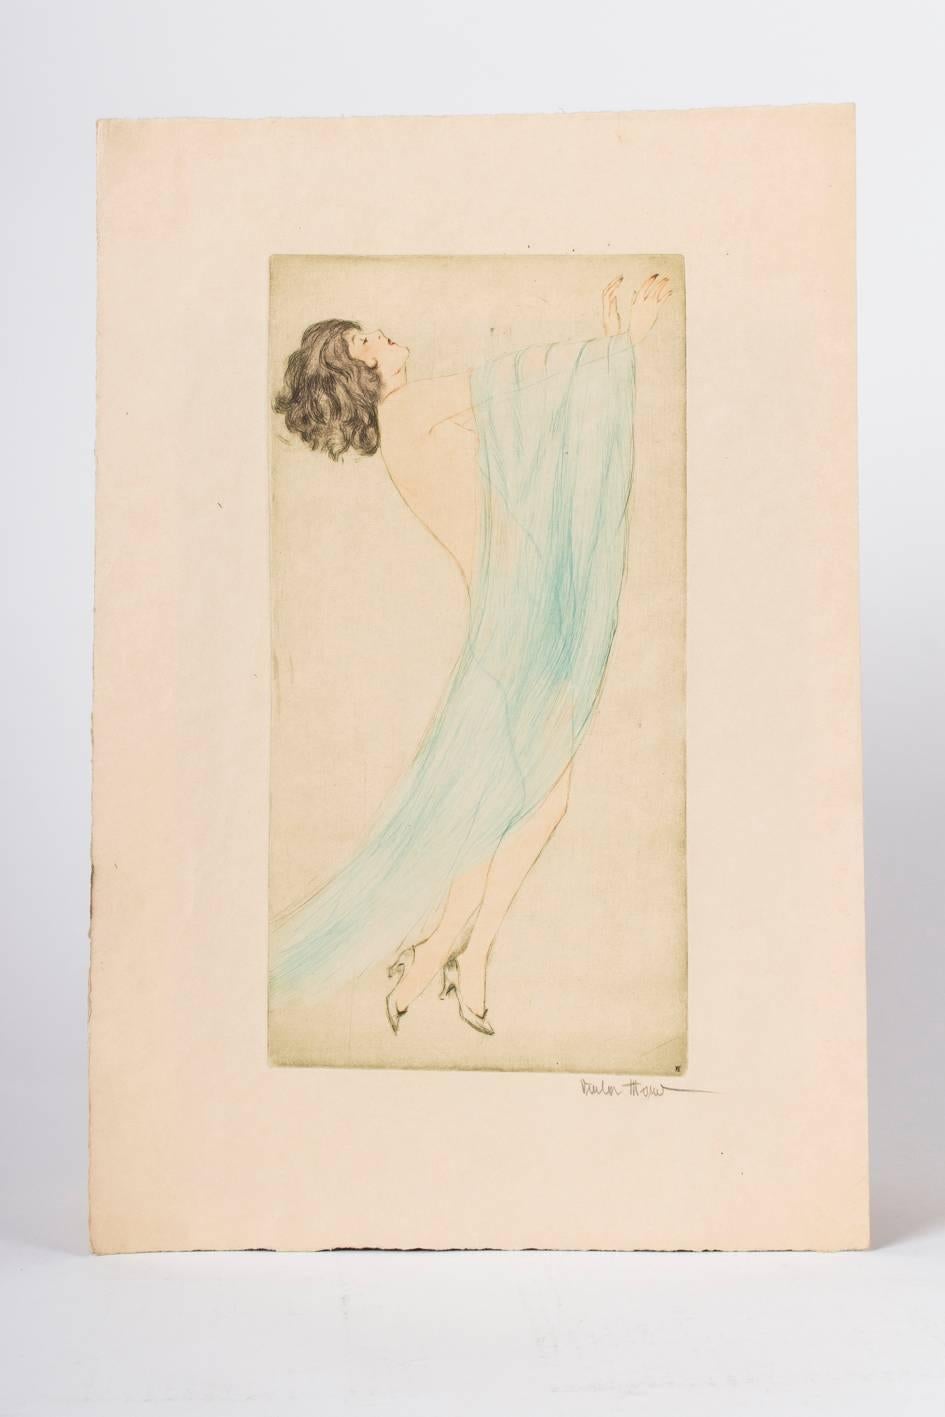 Vala Moro (1907), Vienna 
Art Deco dancing nude, 1924, from the portfolio “Tanz” 
Original colored etching, pencil-signed lower right, Vala Moro“
The picture shows a dancing female figure with high heels. 

Vala Moro (1907) was an